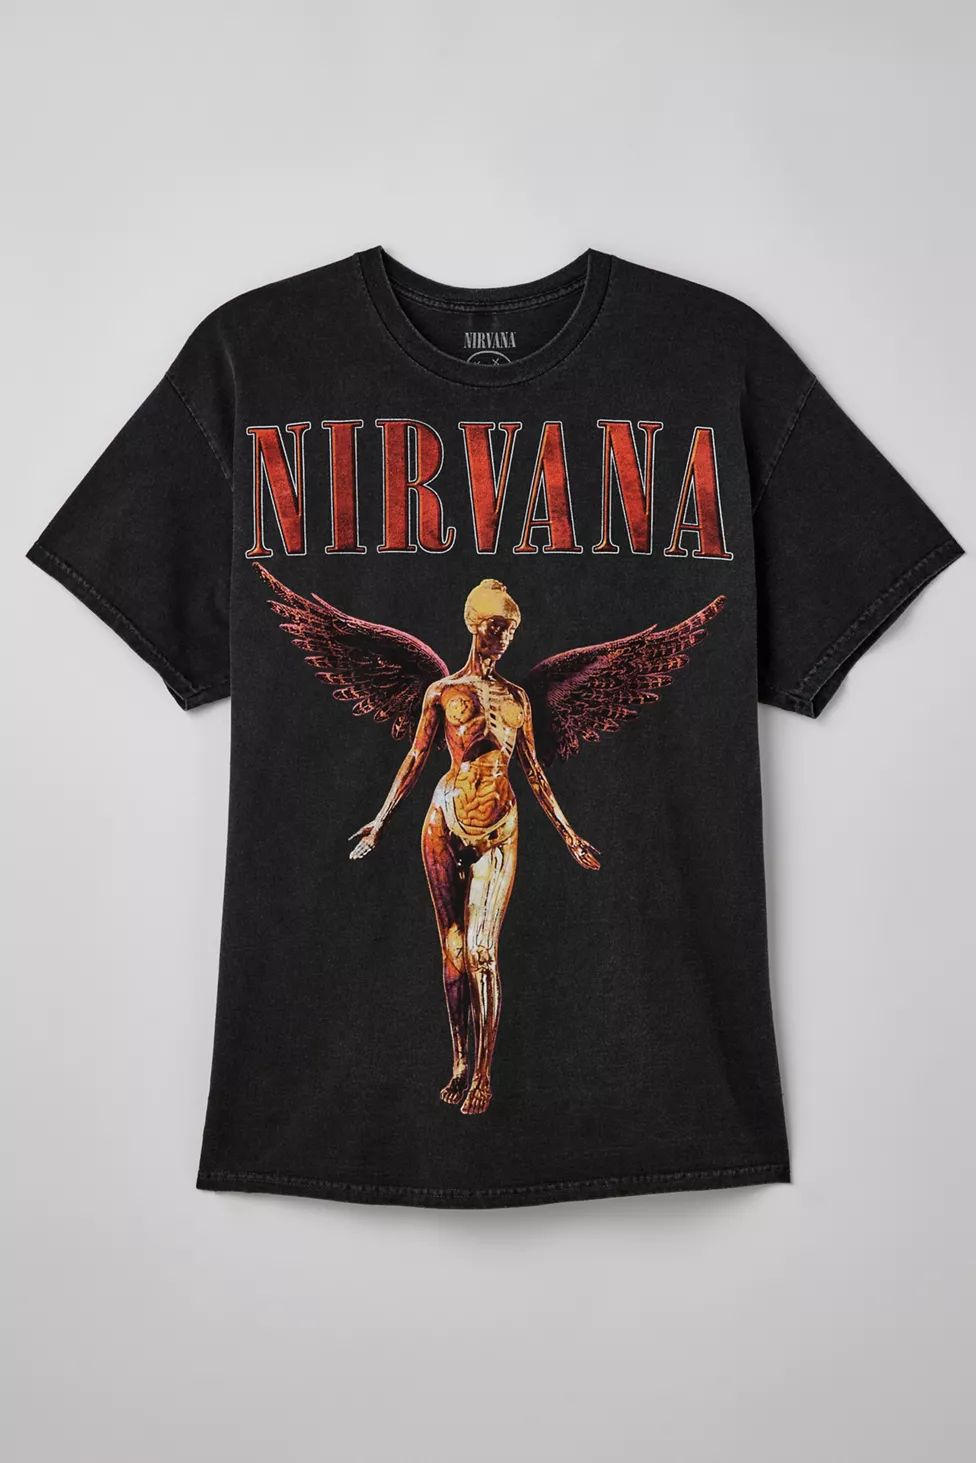 Nirvana In Utero Tour Tee | Urban Outfitters (US and RoW)